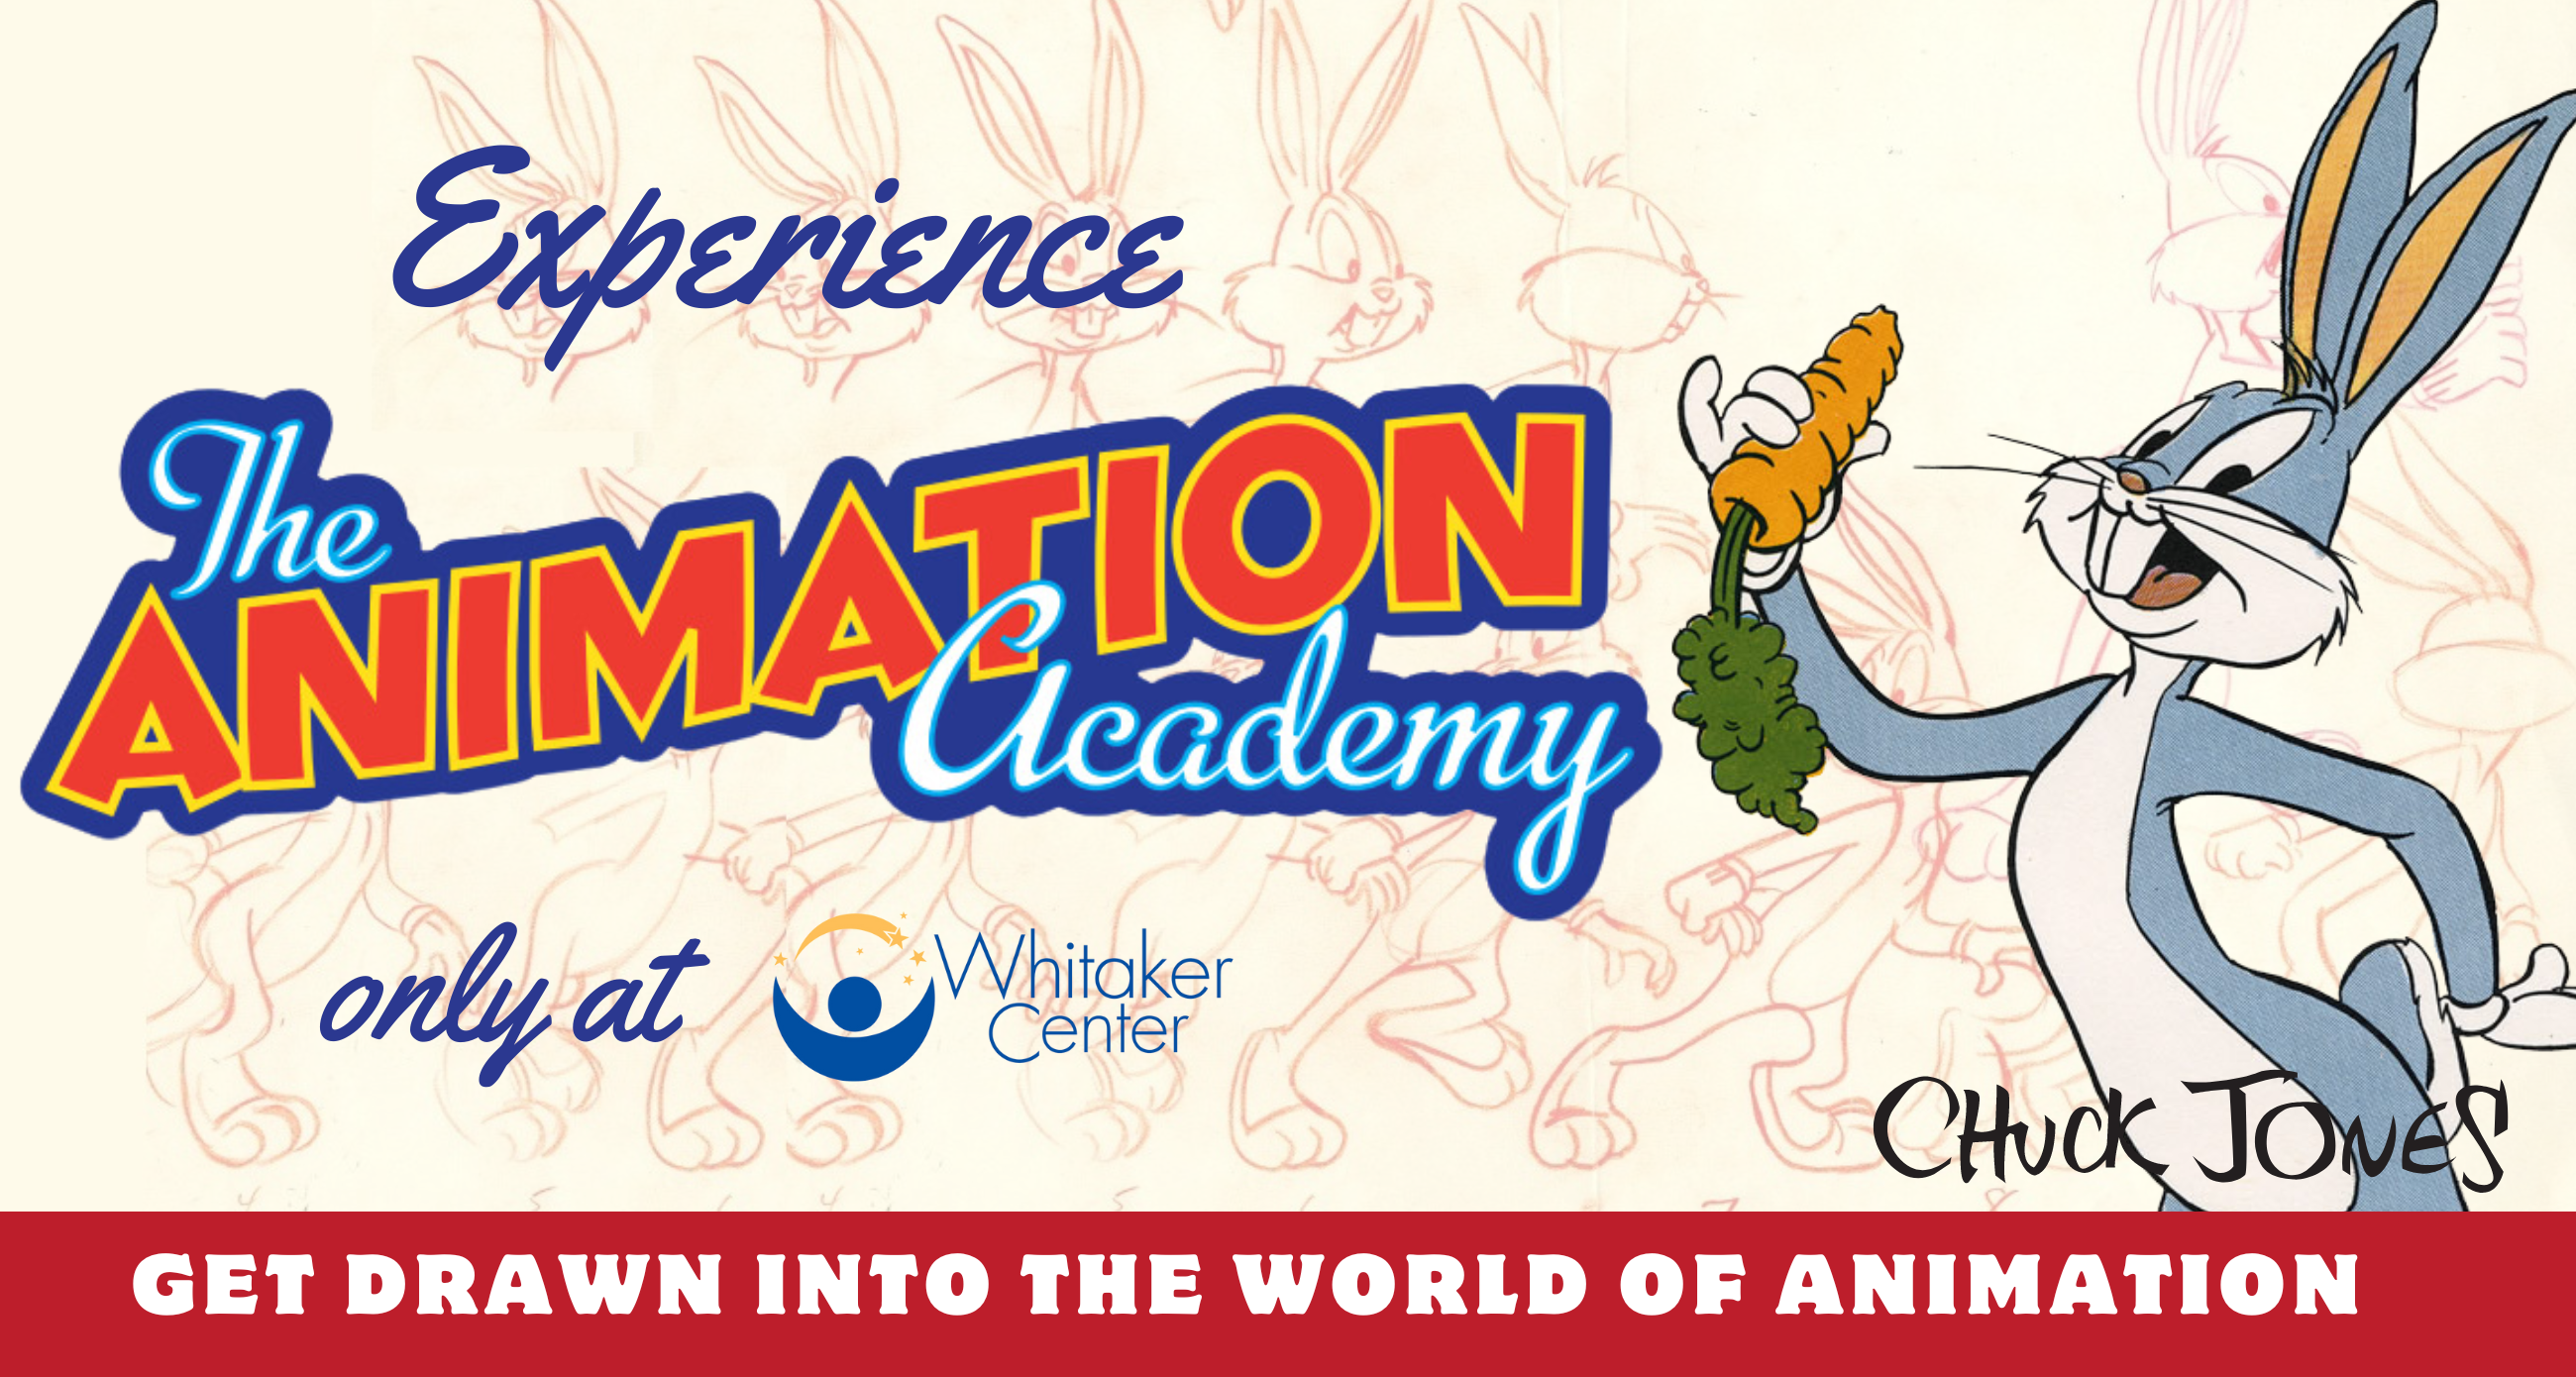 The Animation Academy at Whitaker Center